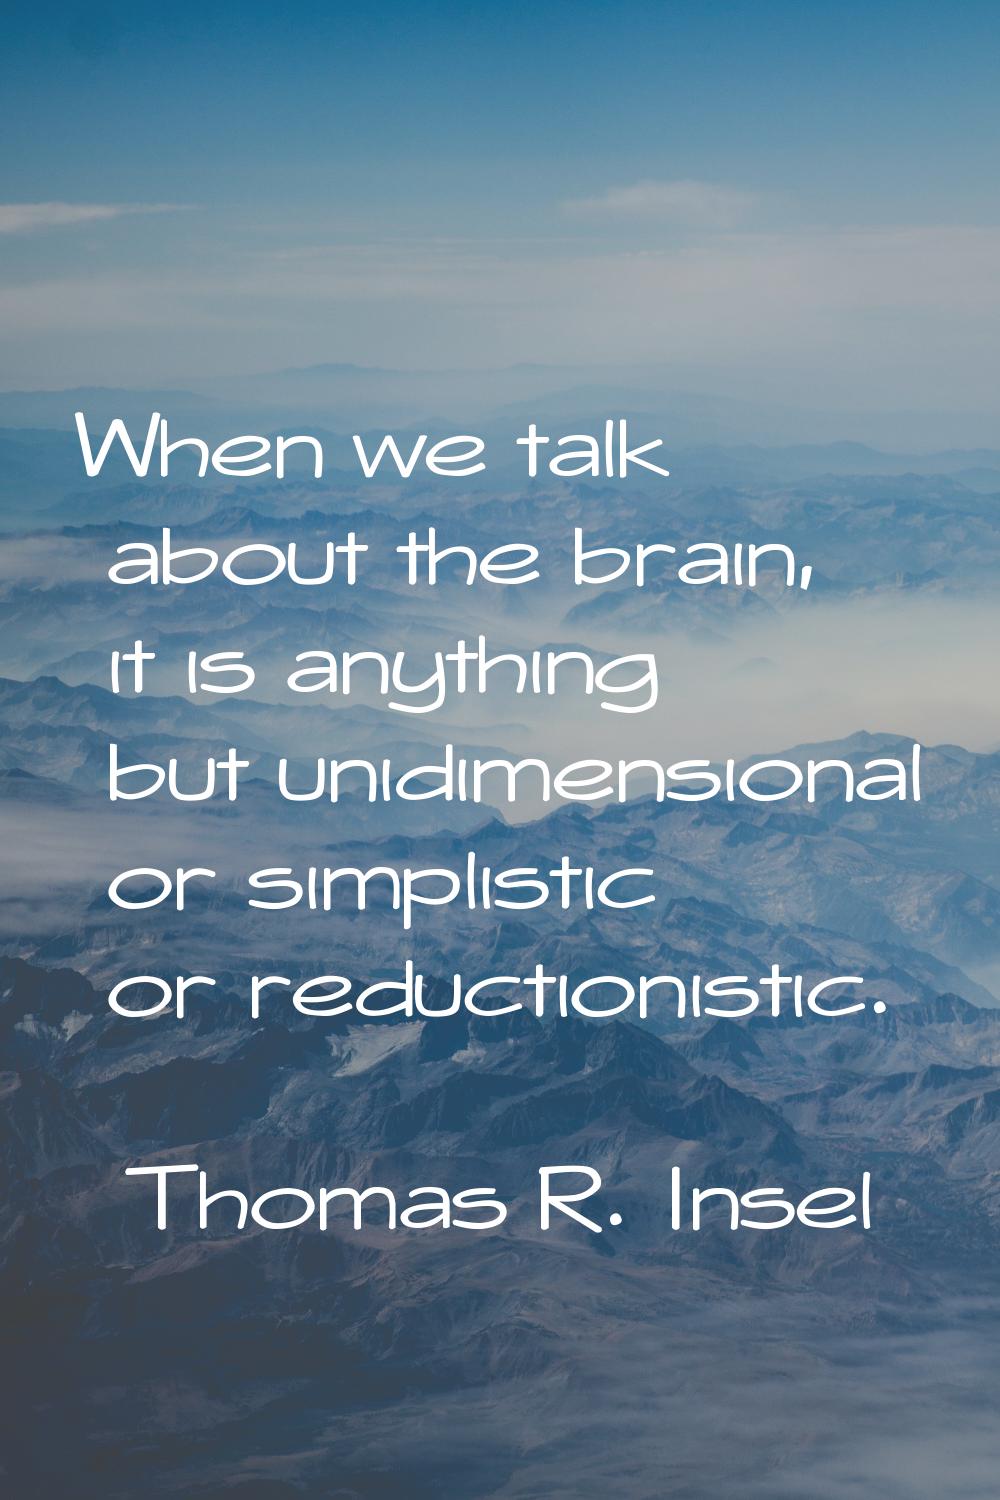 When we talk about the brain, it is anything but unidimensional or simplistic or reductionistic.